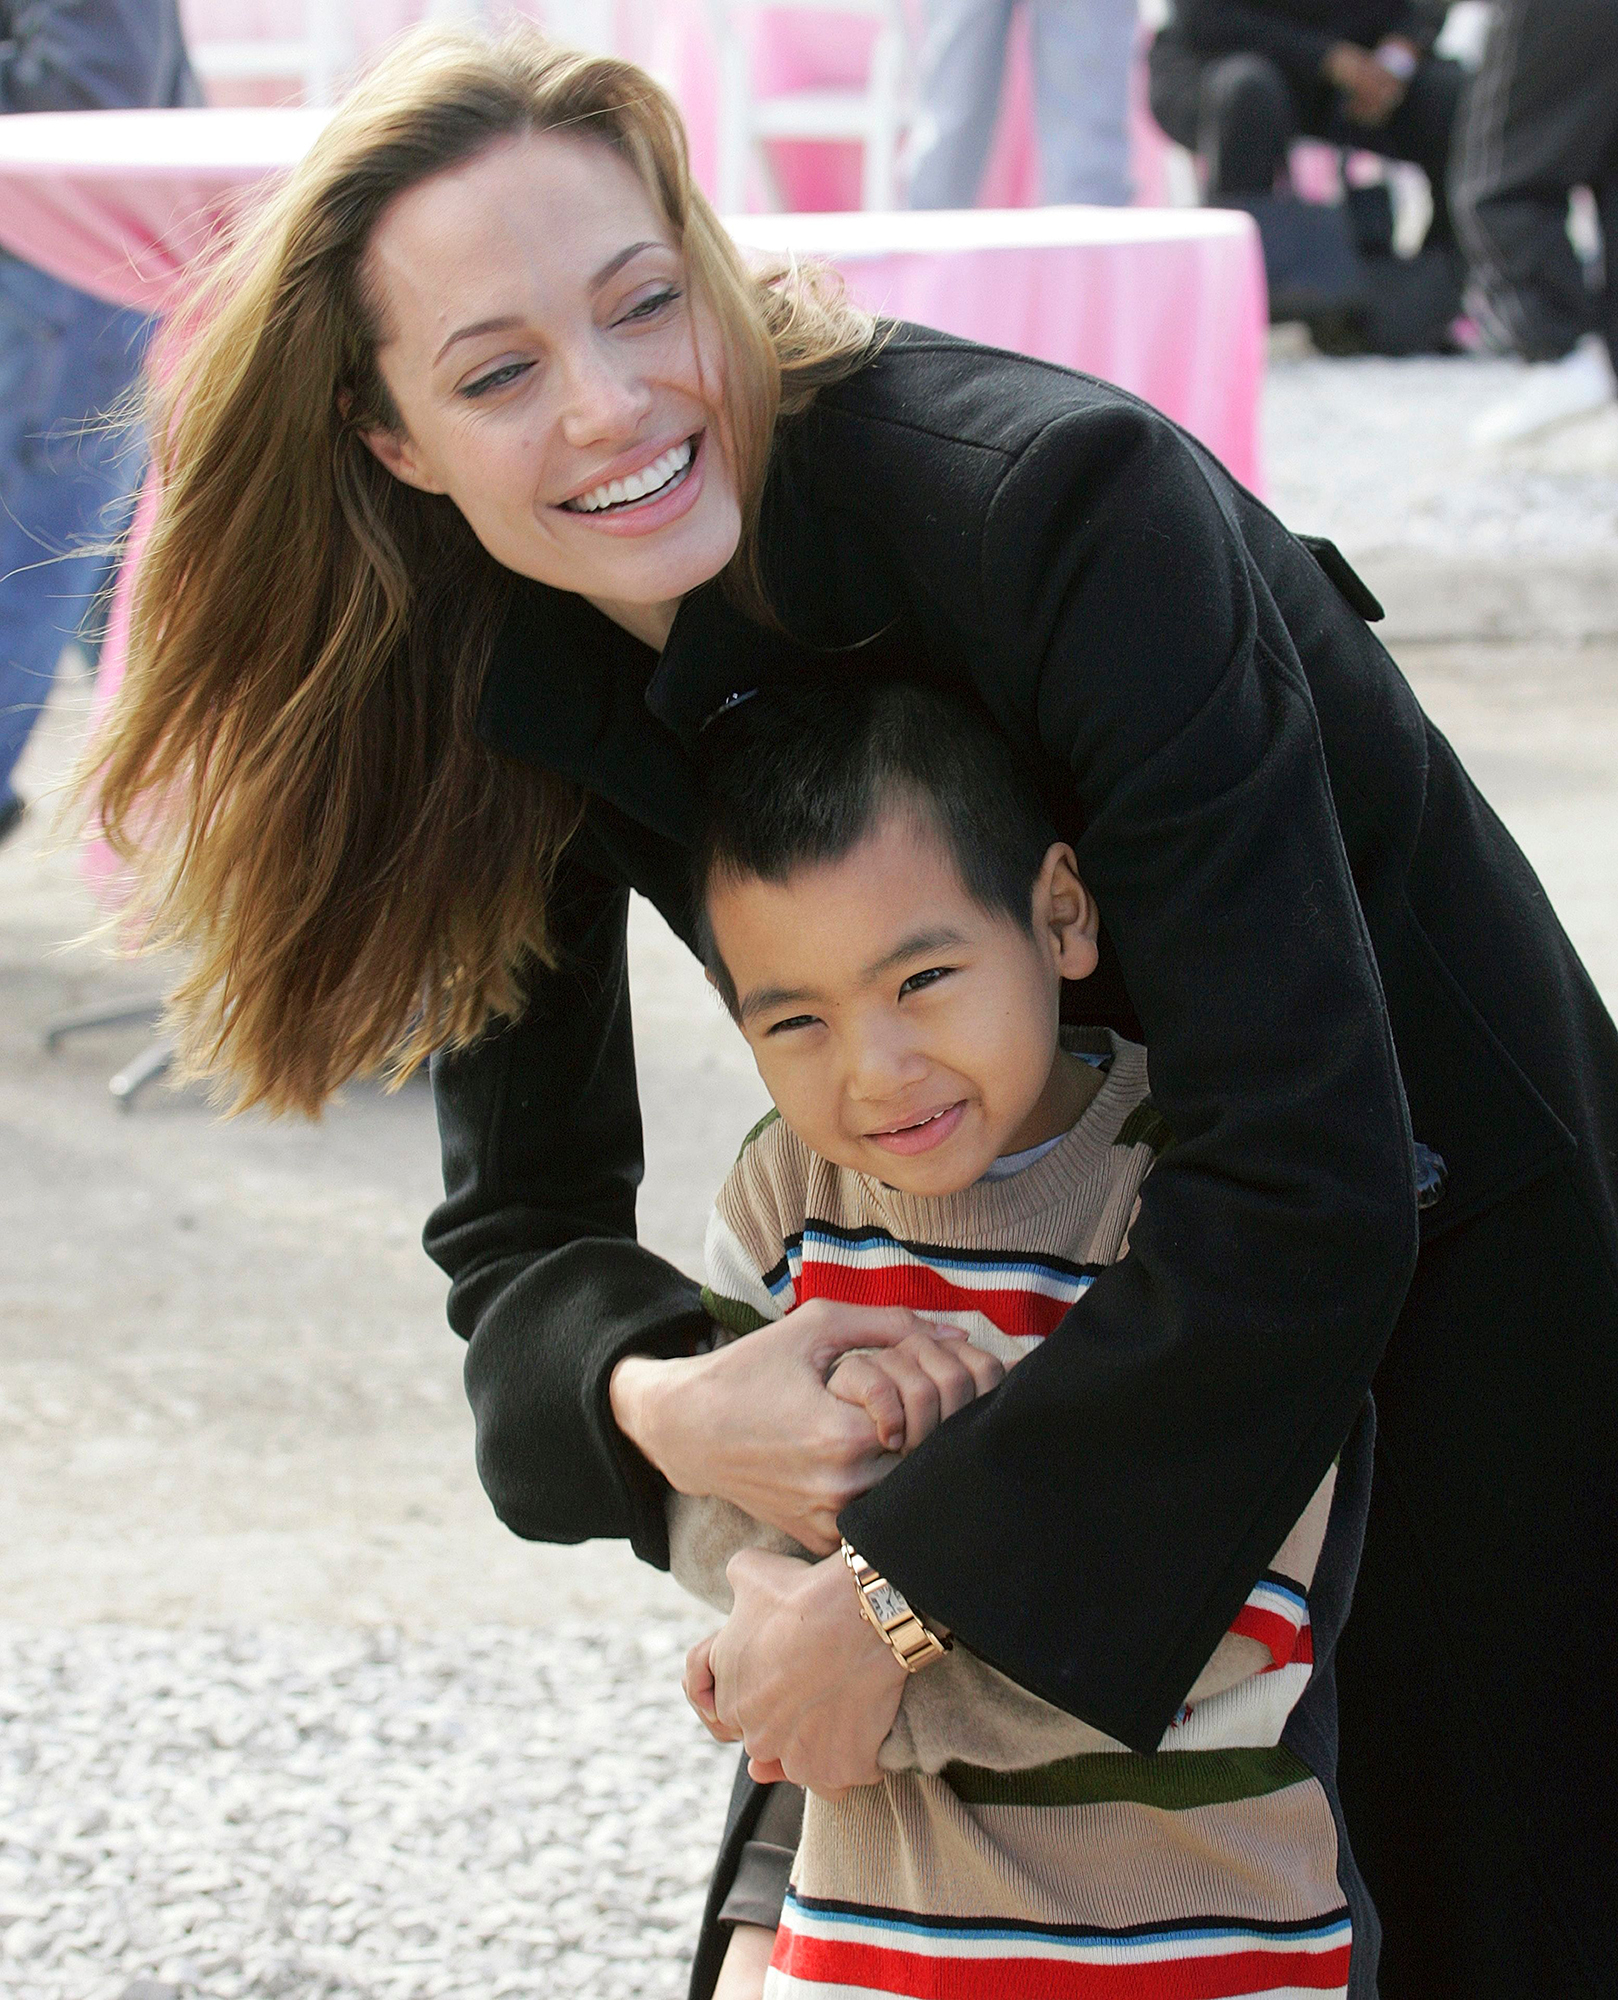 Angelina Jolie's Sons Maddox & Pax Join Her for Another Day of Work on  'Maria' Movie: Photo 4977721, Angelina Jolie, Celebrity Babies, Maddox  Jolie Pitt, Pax Jolie Pitt Photos